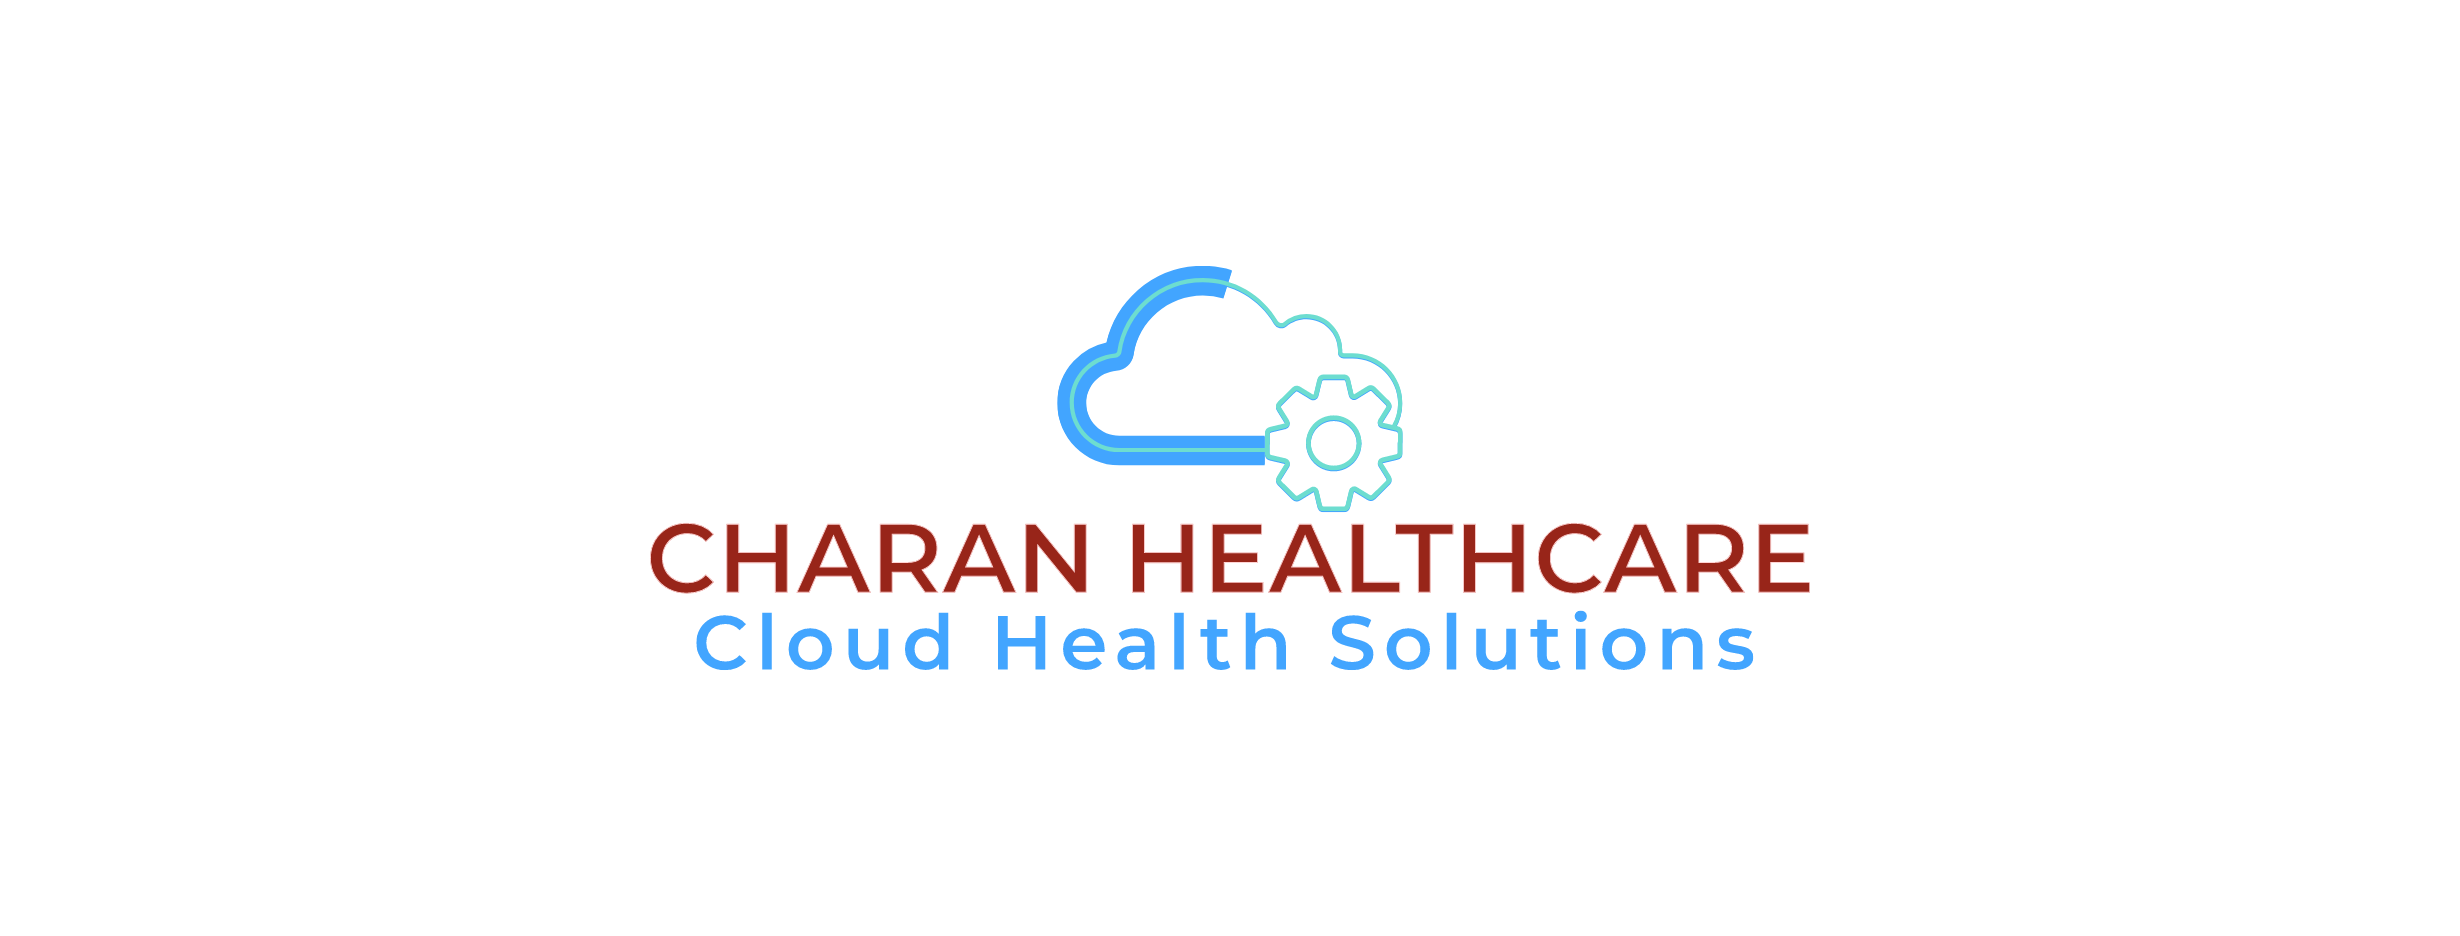 Charan Healthcare Cloud Health Solutions